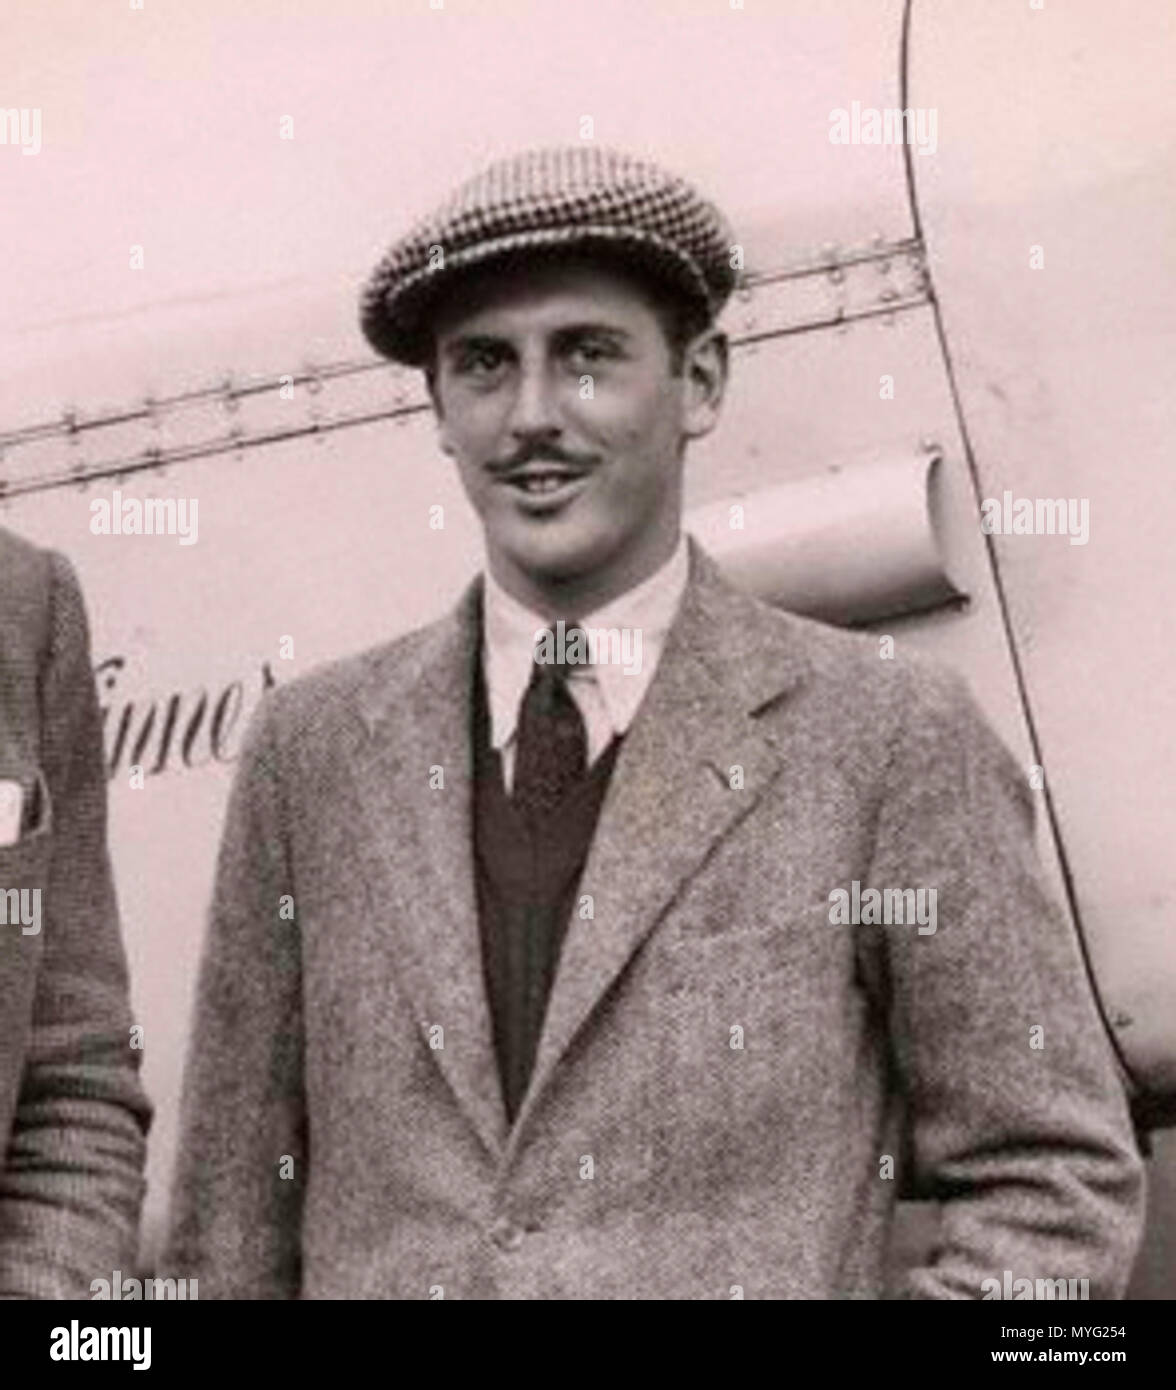 . English: Giles Guthrie, standing in front of the Percival Vega Gull G-AEKE in which they won the Schlesinger Air Race. September 1936. punlished by Planet News in 1936 unknown author 211 Giles Guthrie 1936 Stock Photo